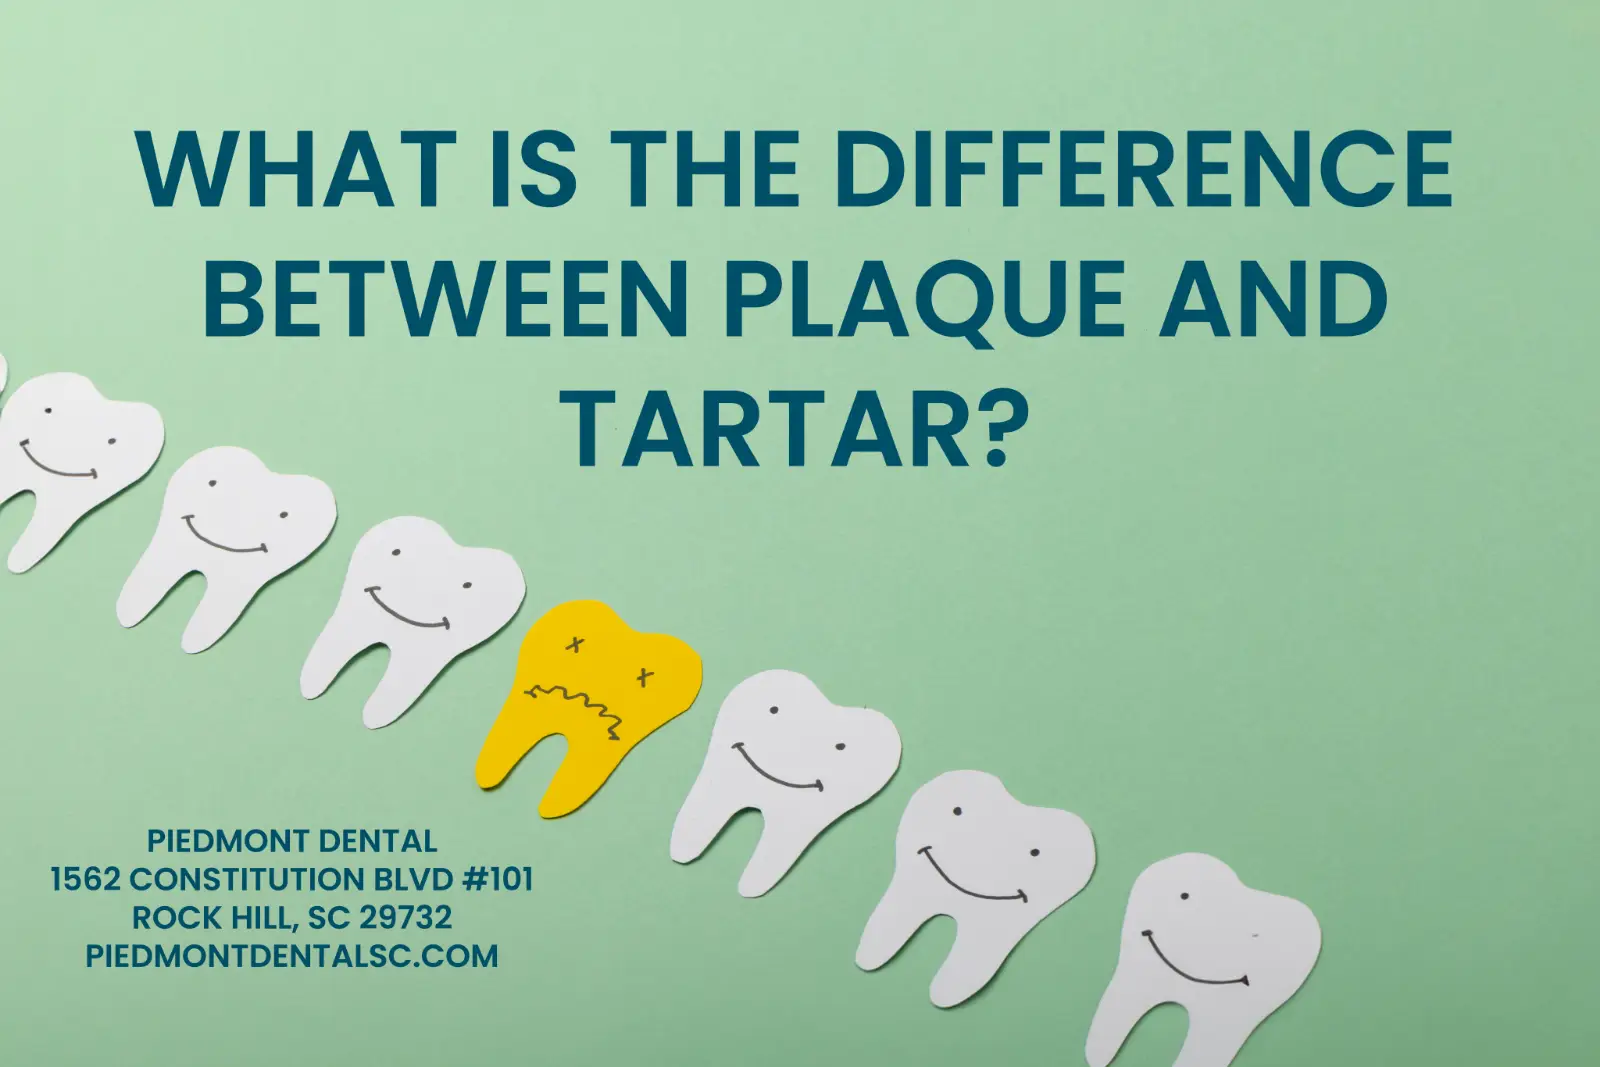 what is the difference between plaque and tarter?